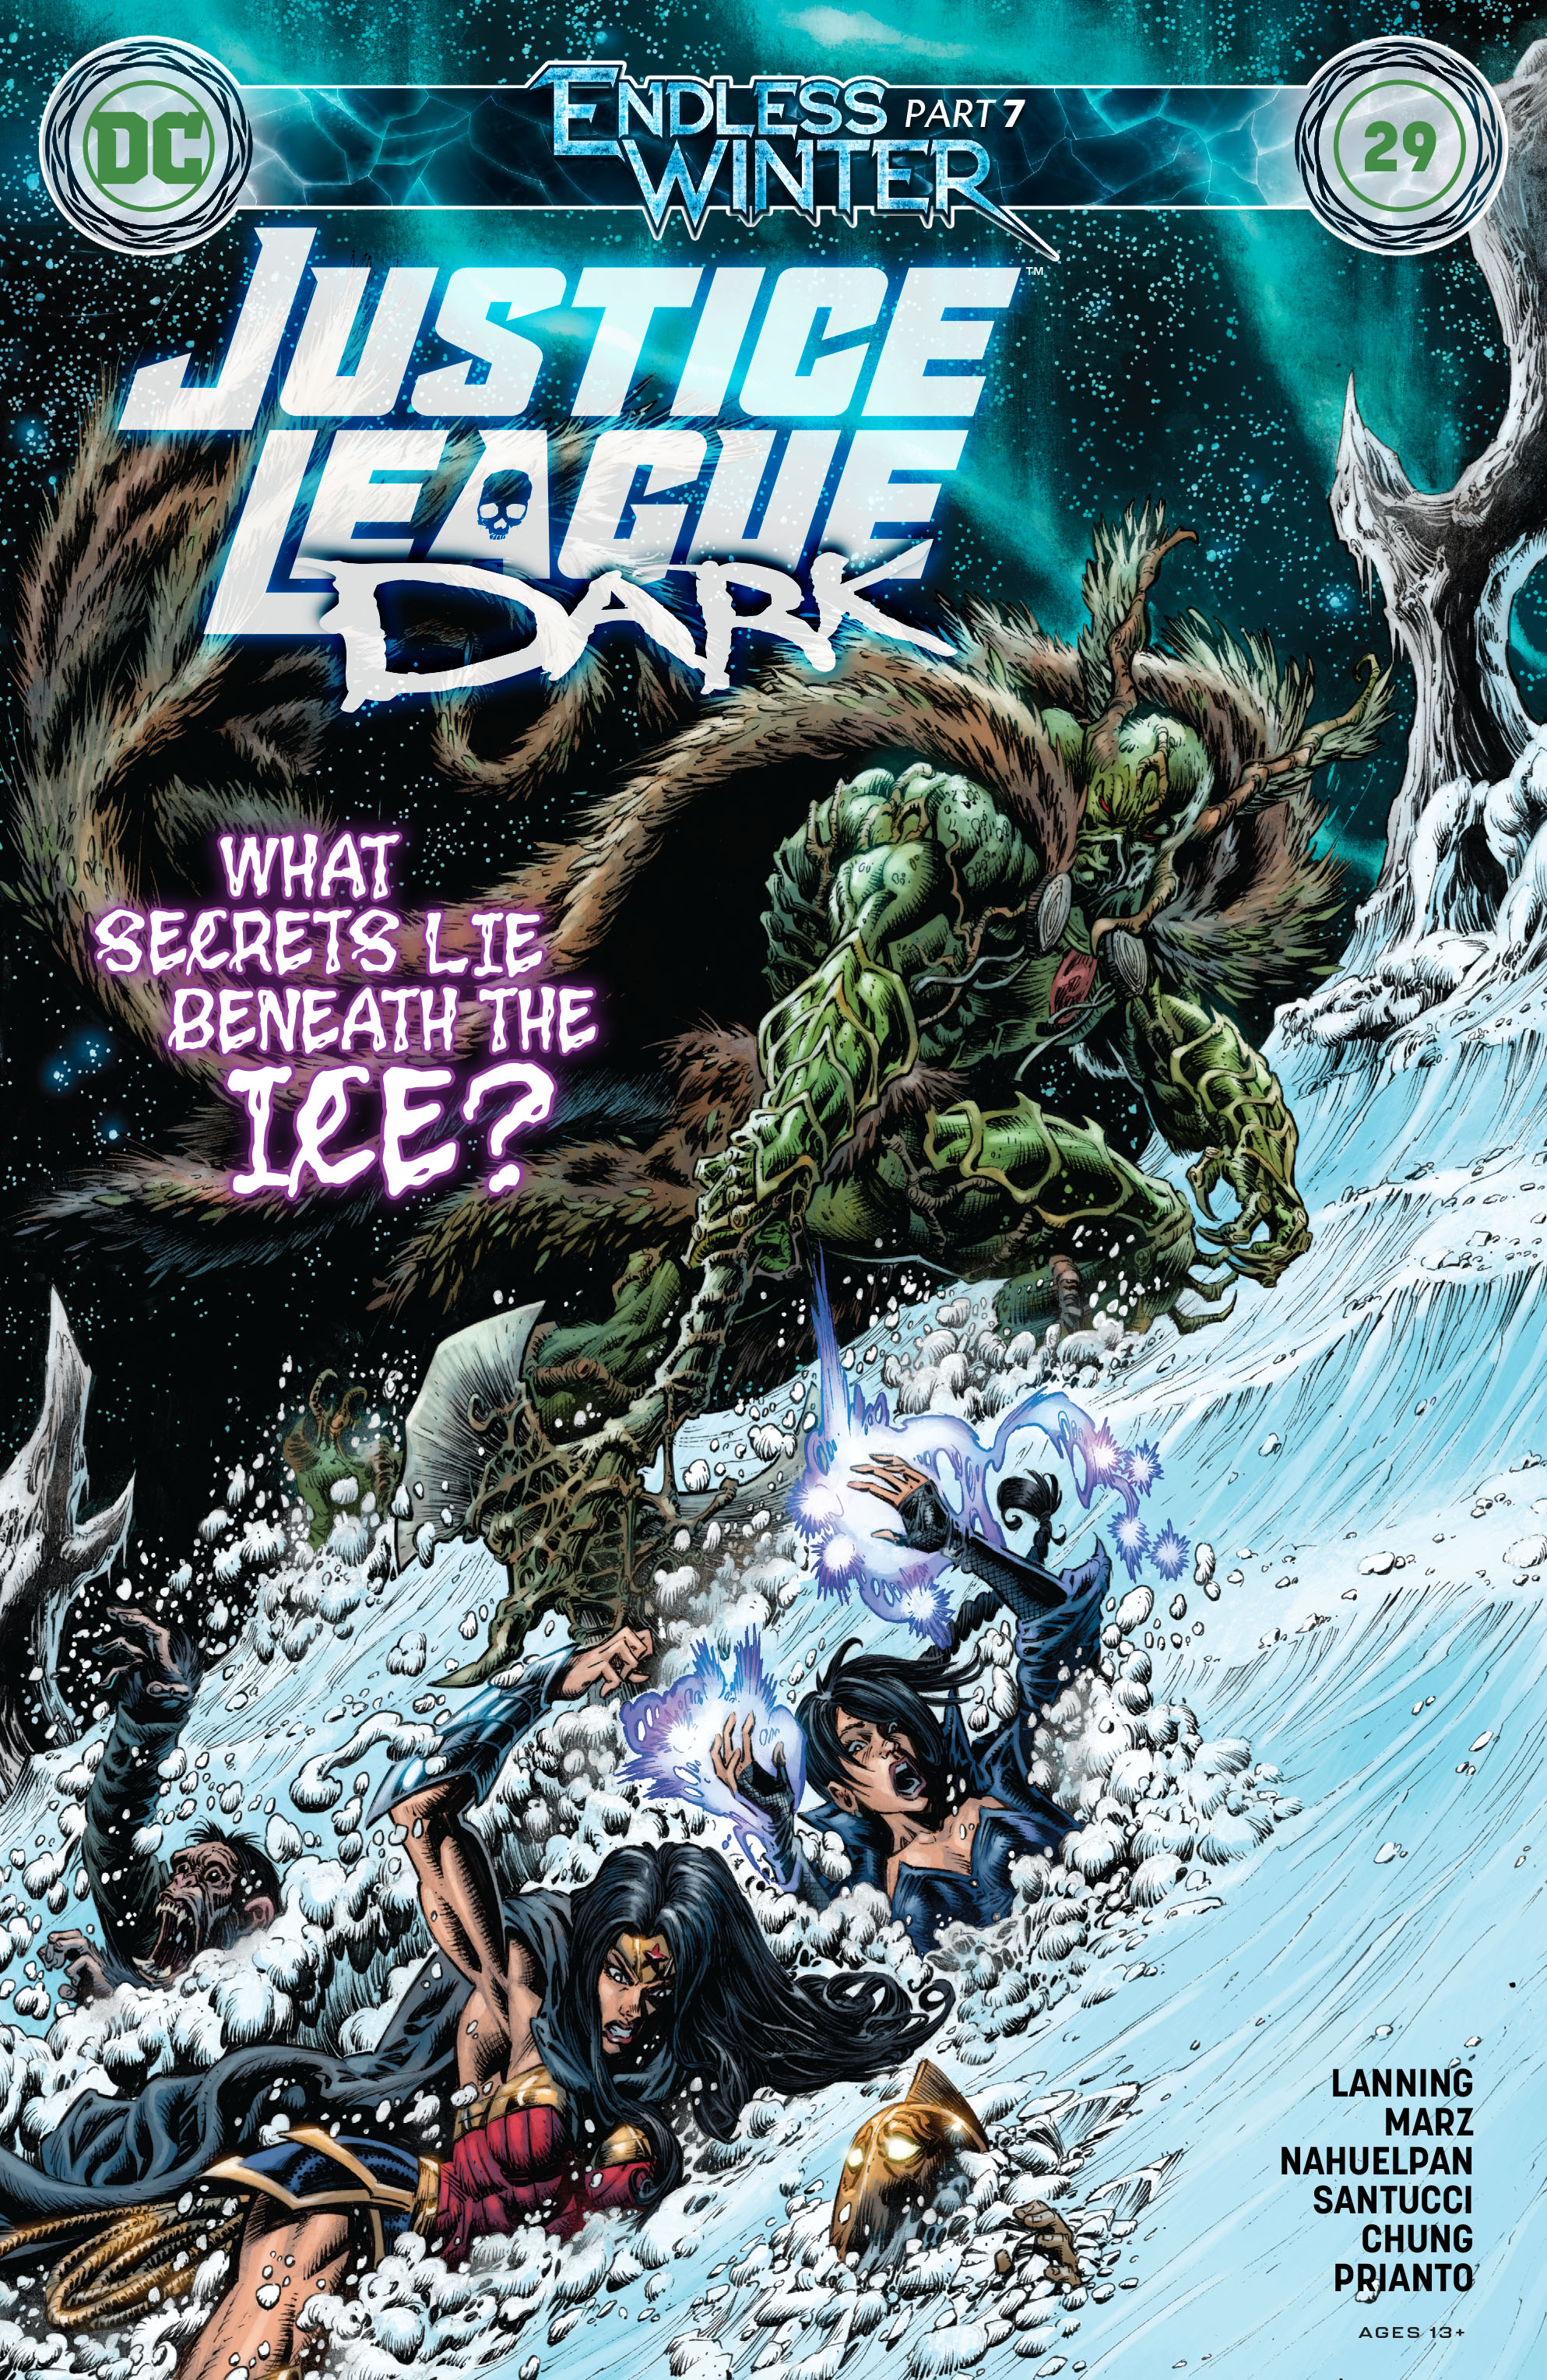 Justice League Dark #29 Cover A Kyle Hotz (Endless Winter) (2018)